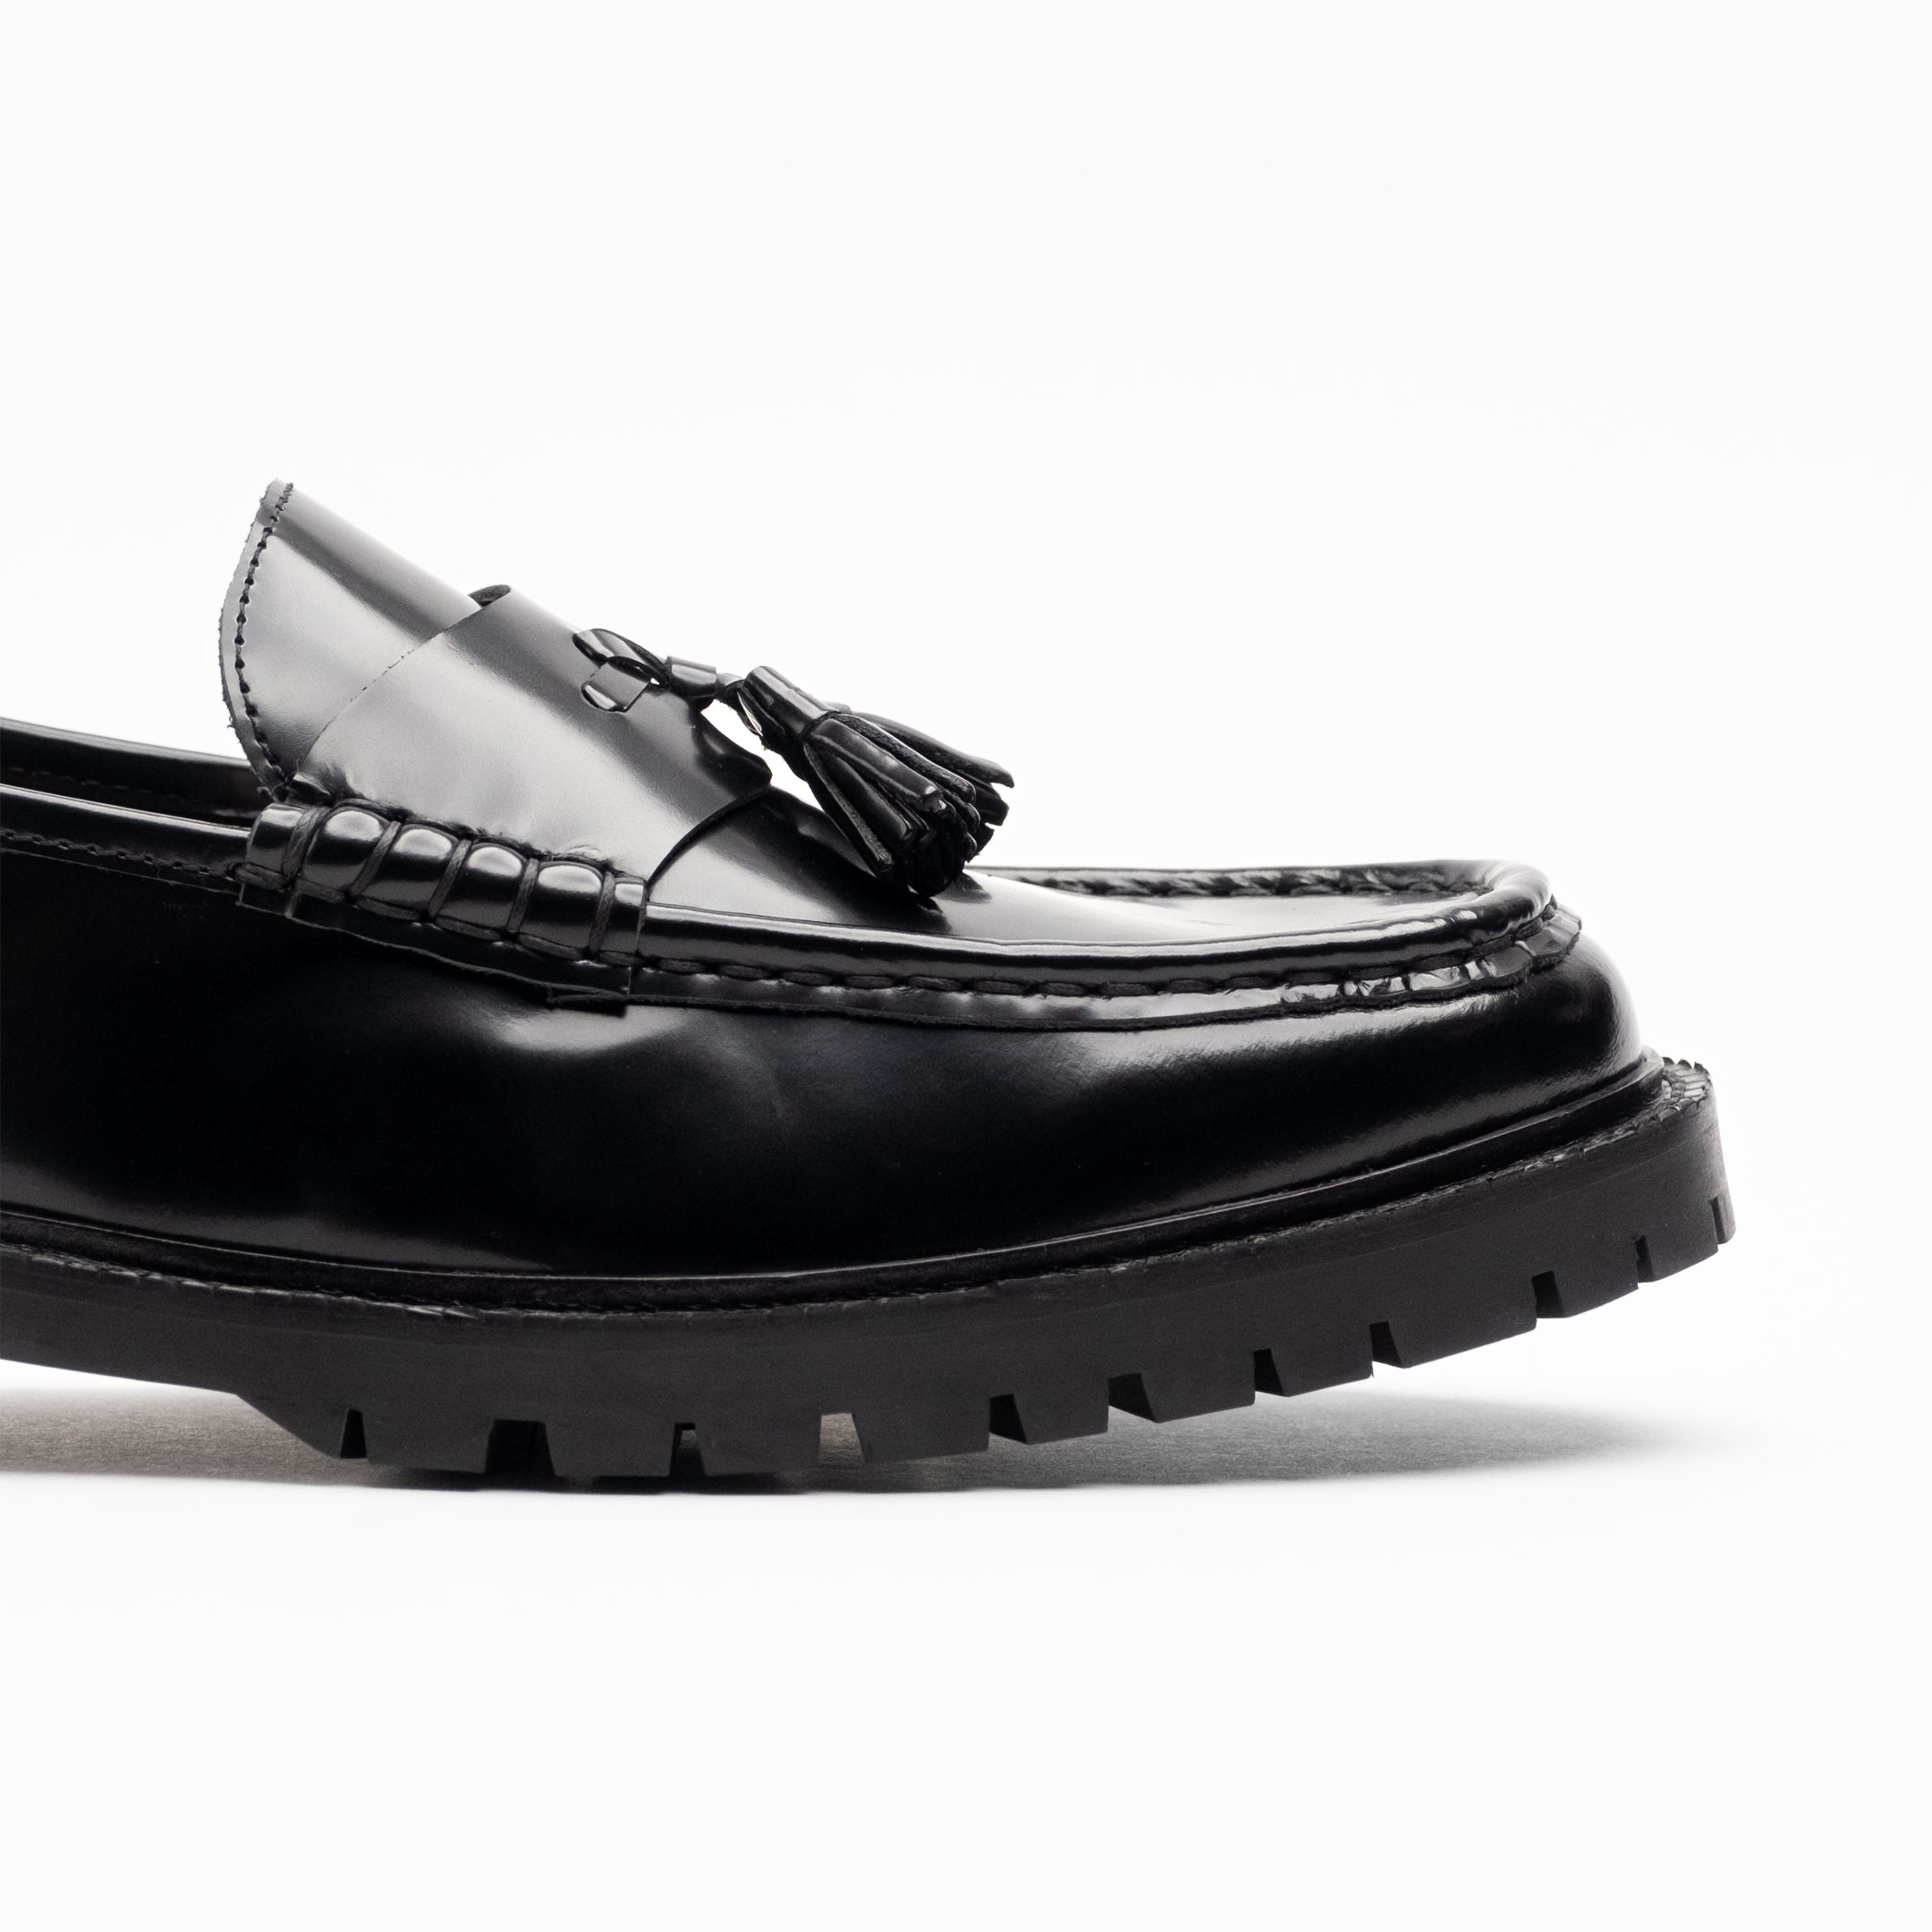 Walk London Mens Campus Tassel Loafer in Smooth Black Leather